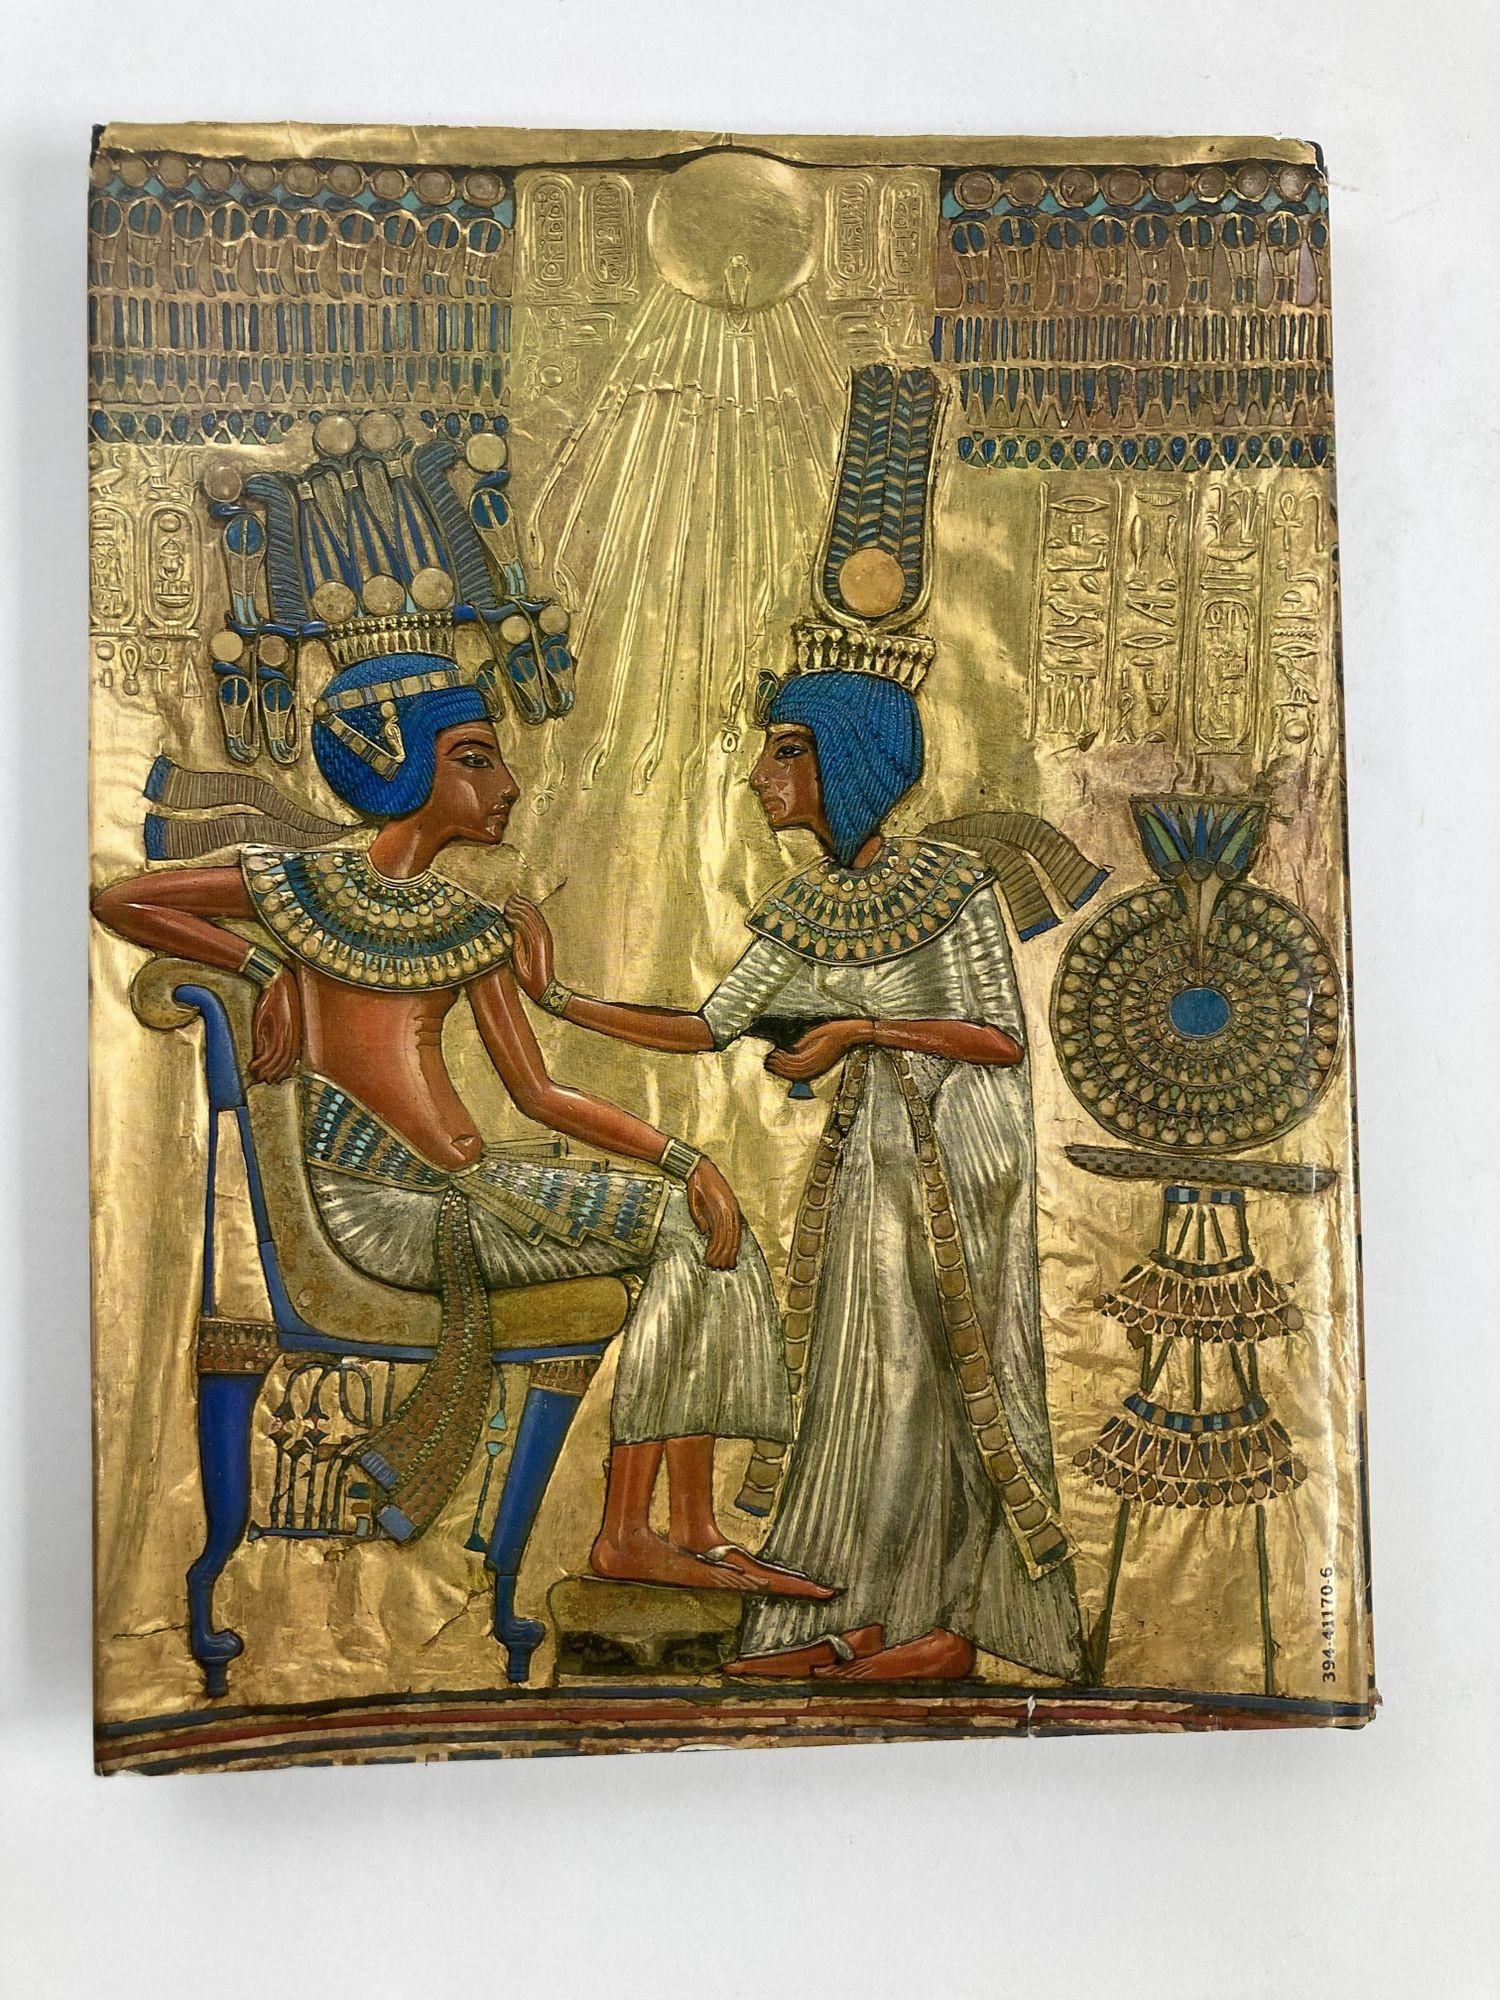 Tutankhamun: His Tomb and Its Treasures Hardcover Book
New York: Metropolitan Museum of Art and Alfred A.
Knopf, Inc, 1976.
Title: Tutankhamun: His Tomb and Its Treasures
Publisher: Random House Inc
Publication Date: 1977
Binding: Hardcover
Book